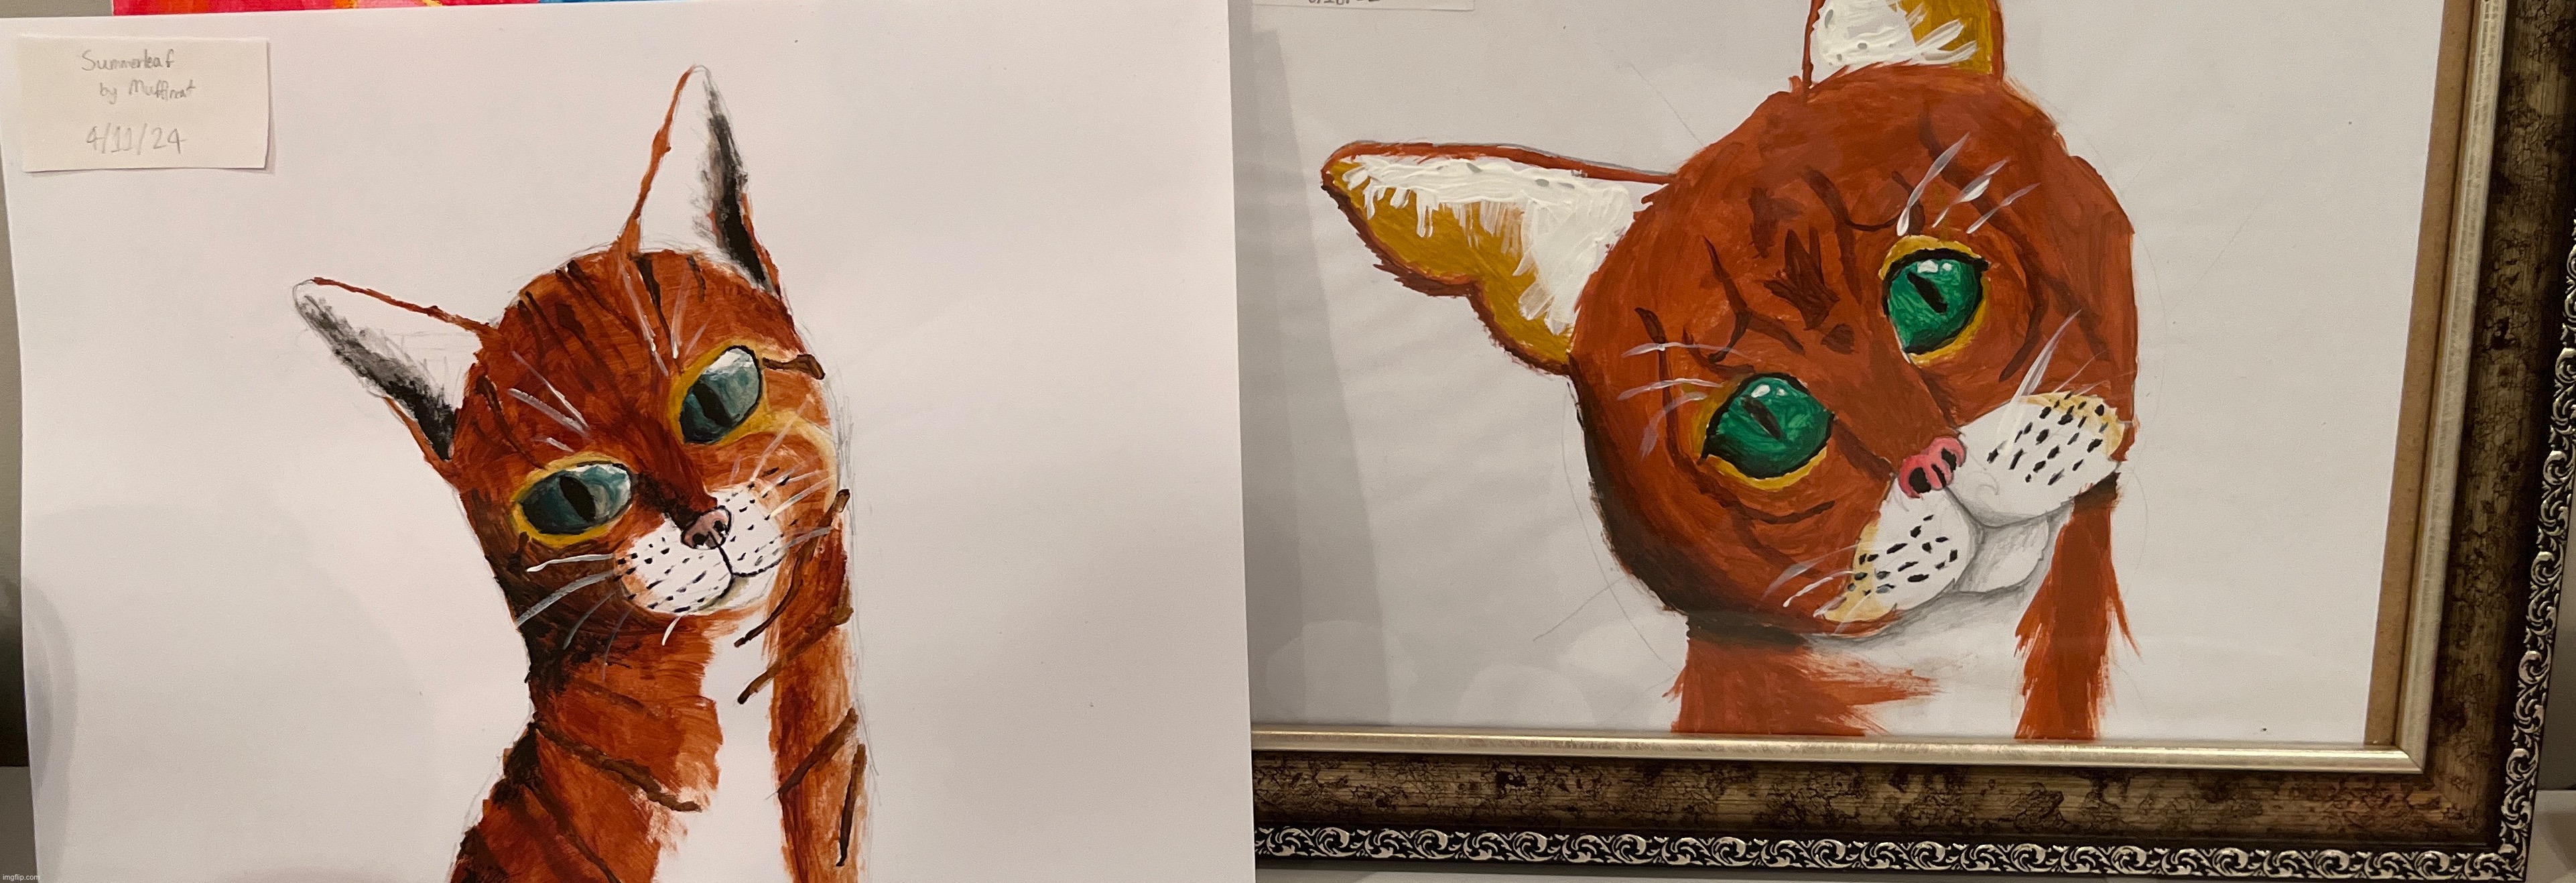 (The one on the left is new, the right one is old) | image tagged in painting,cat | made w/ Imgflip meme maker